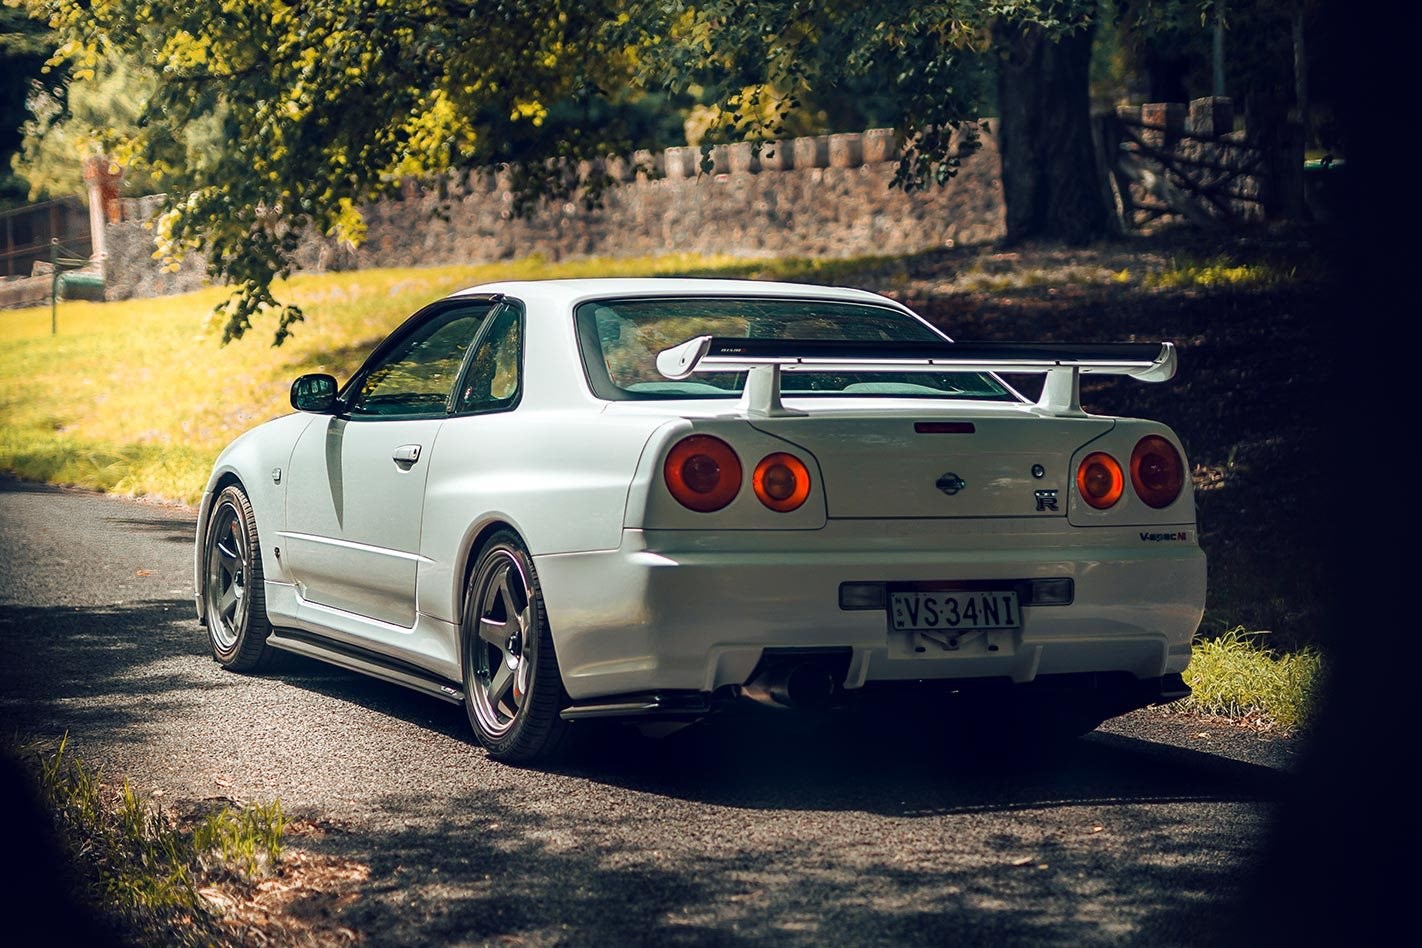 The Nissan Skyline R34 GTR was nearly powered by a V6